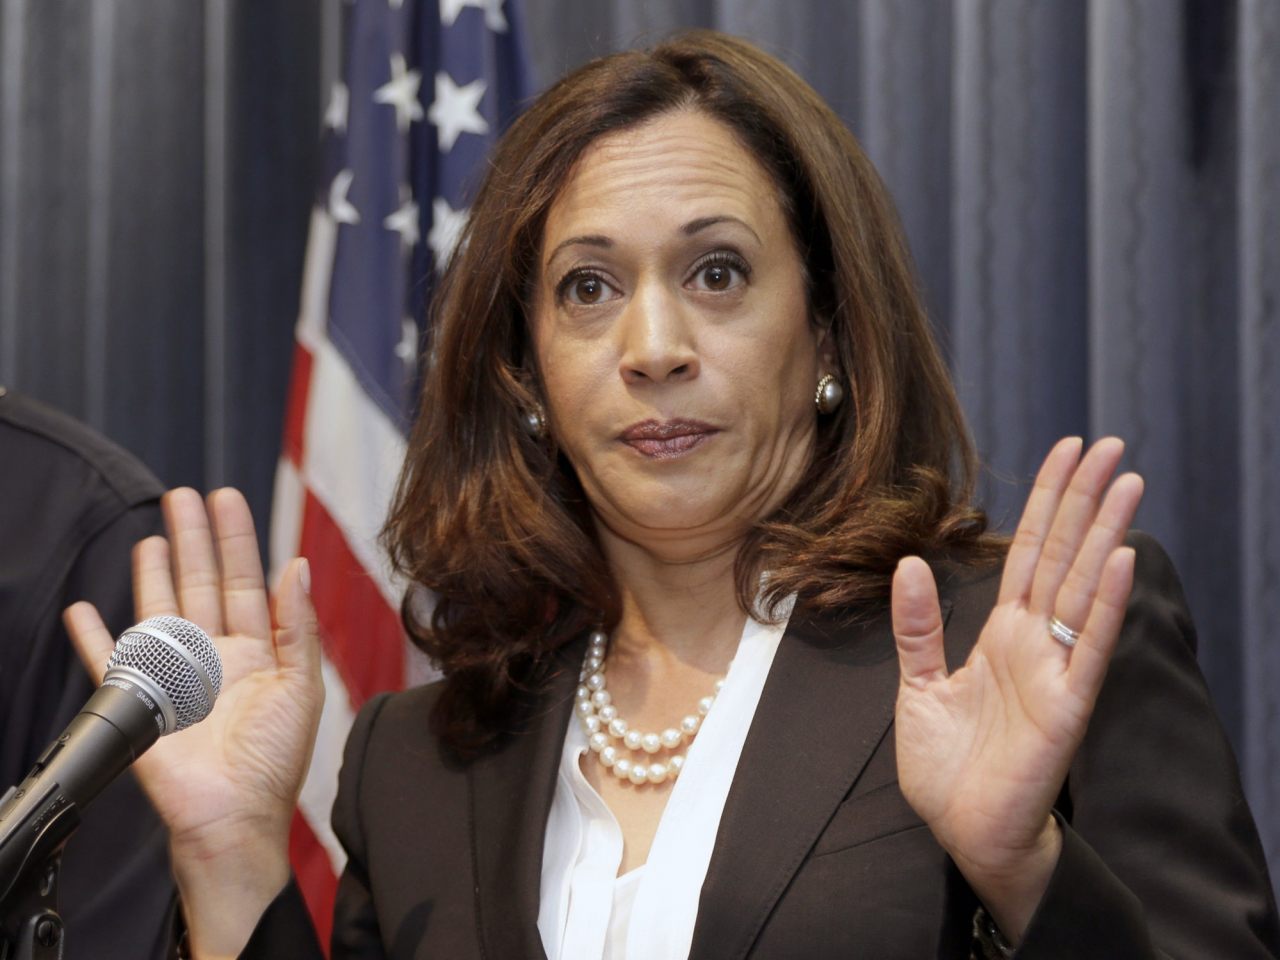 Kamala Harris caught in blatant LIE about school desegregation… do liberals just fabricate everything?